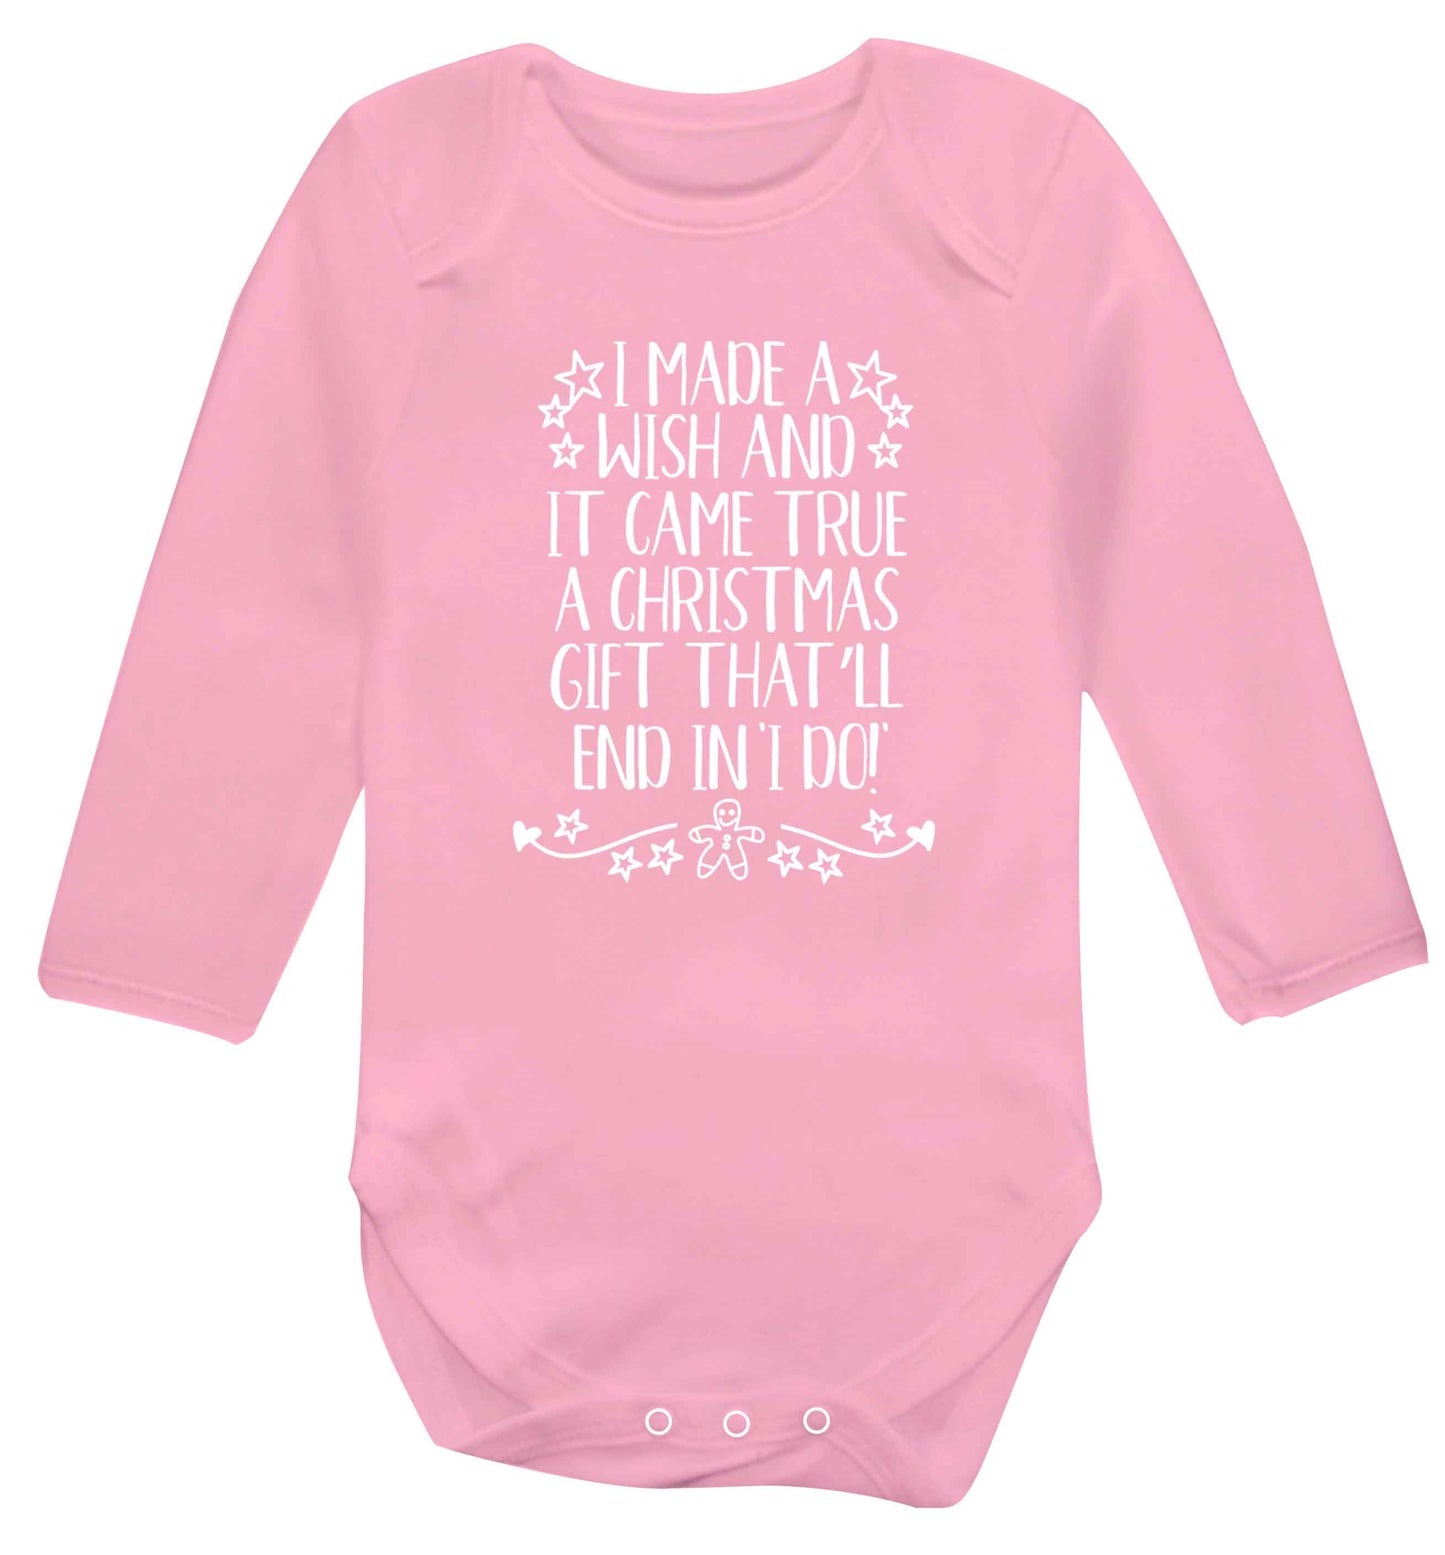 I made a wish and it came true a Christmas gift that'll end in 'I do' Baby Vest long sleeved pale pink 6-12 months